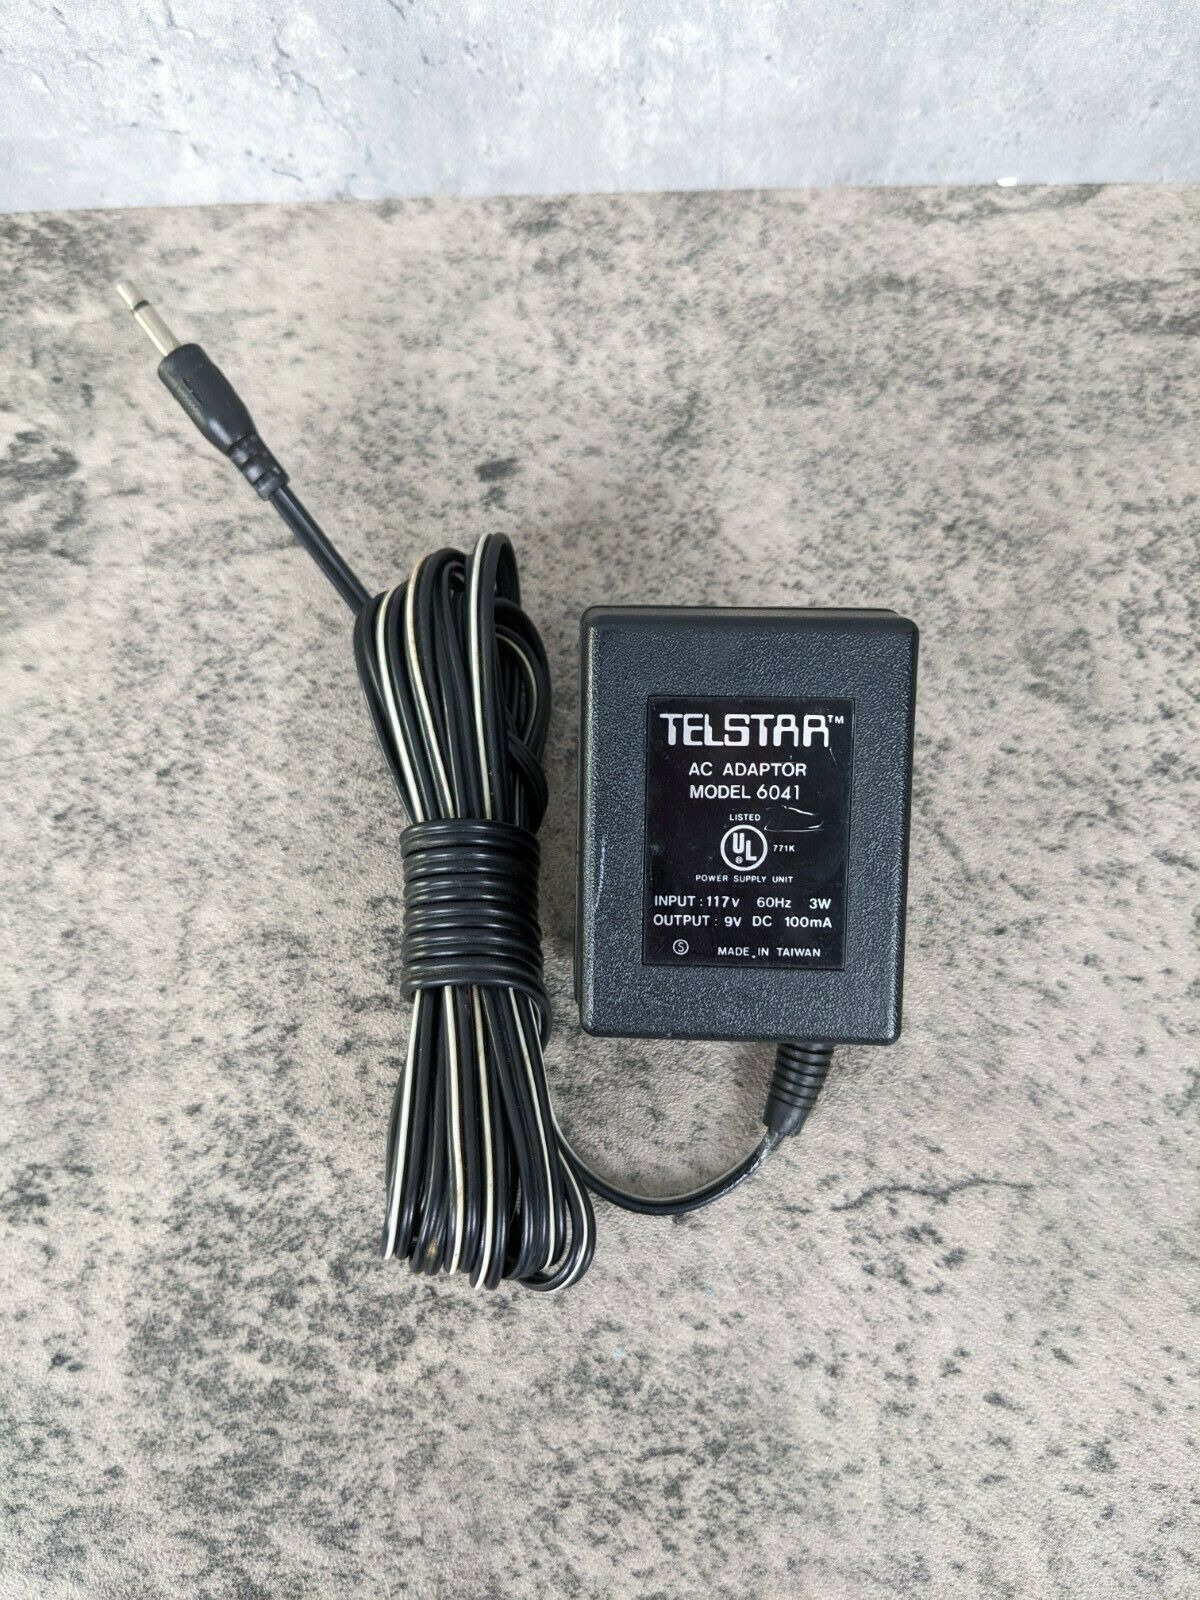 Vintage Coleco Telstar AC Adapter 6041 Original Power Cord Tested Brand: Coleco - Click Image to Close